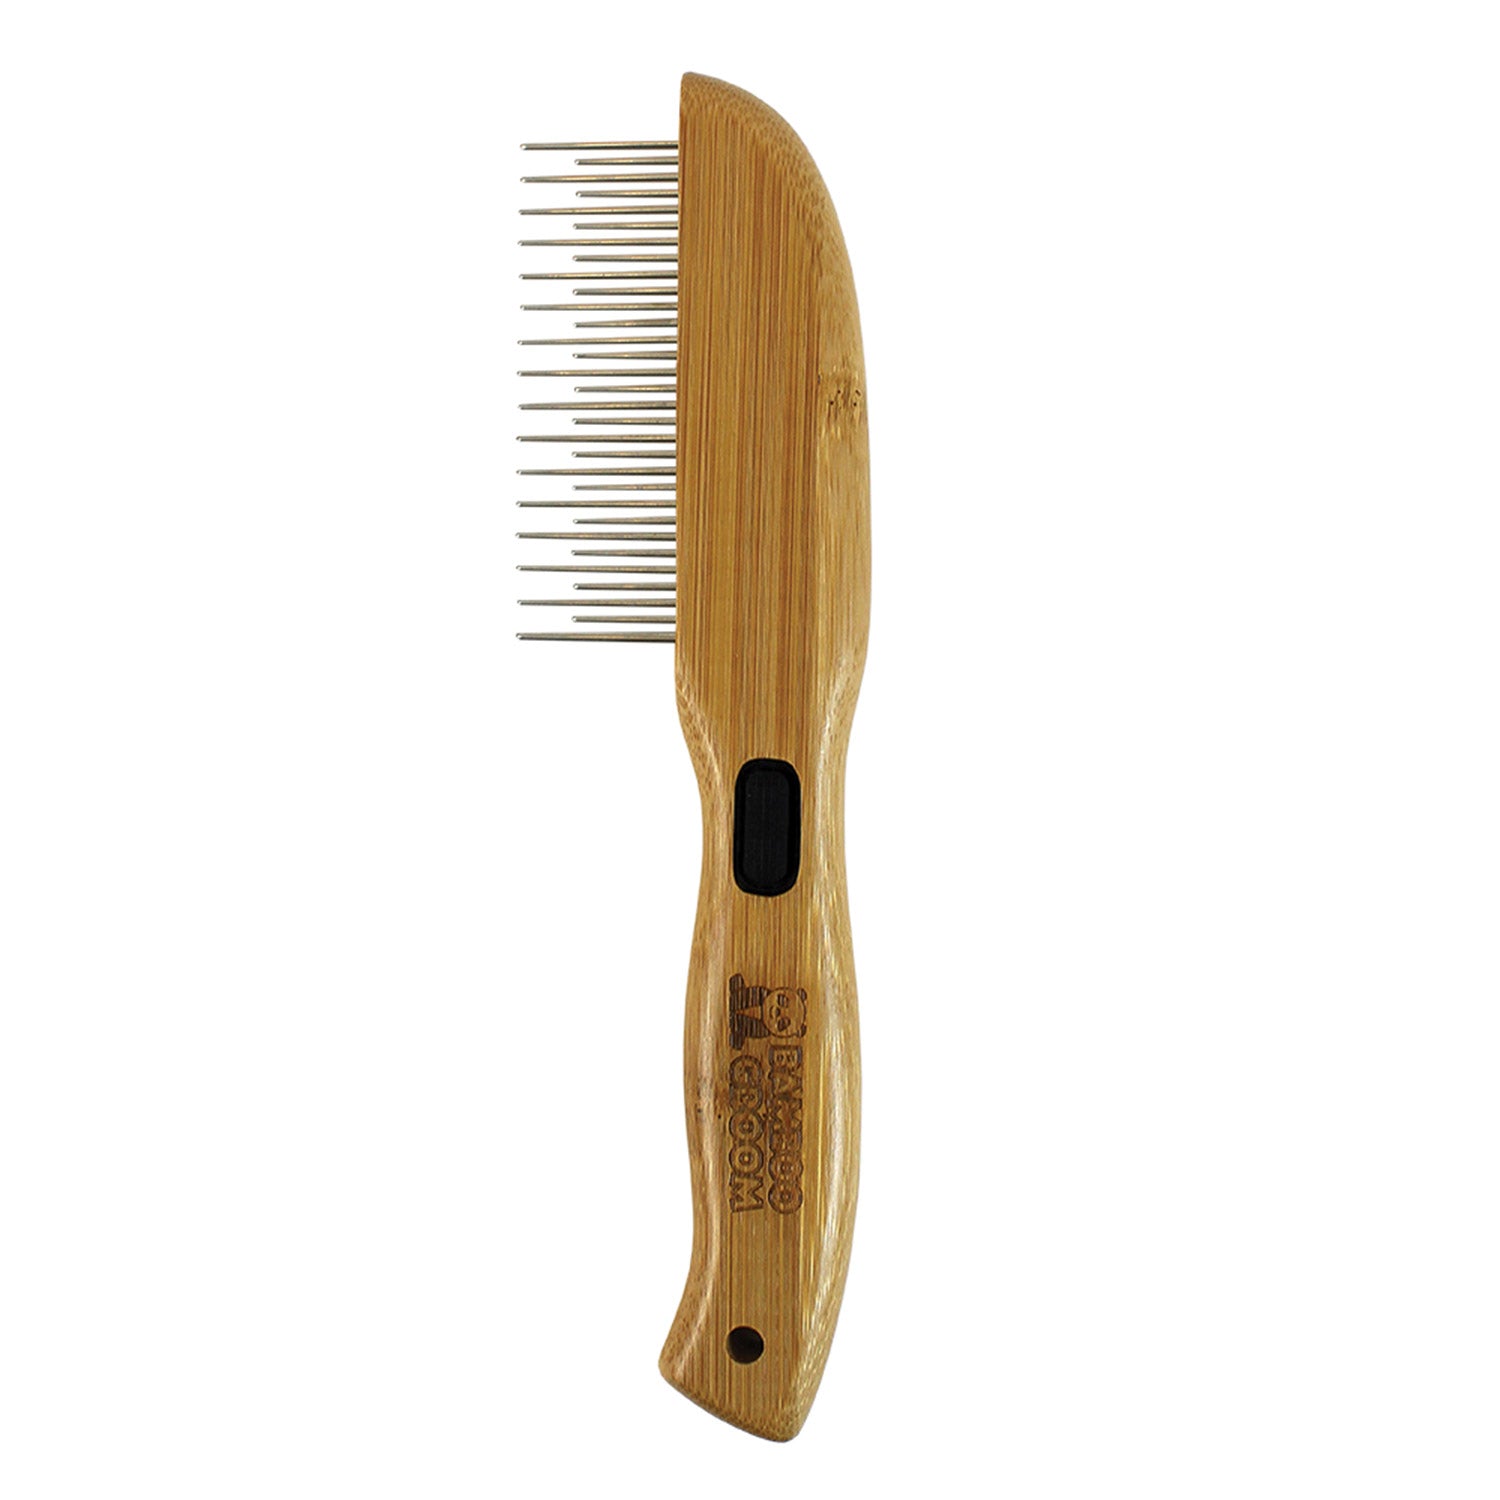 Bamboo Groom Rotating Pin Comb with 31 Rounded Pins